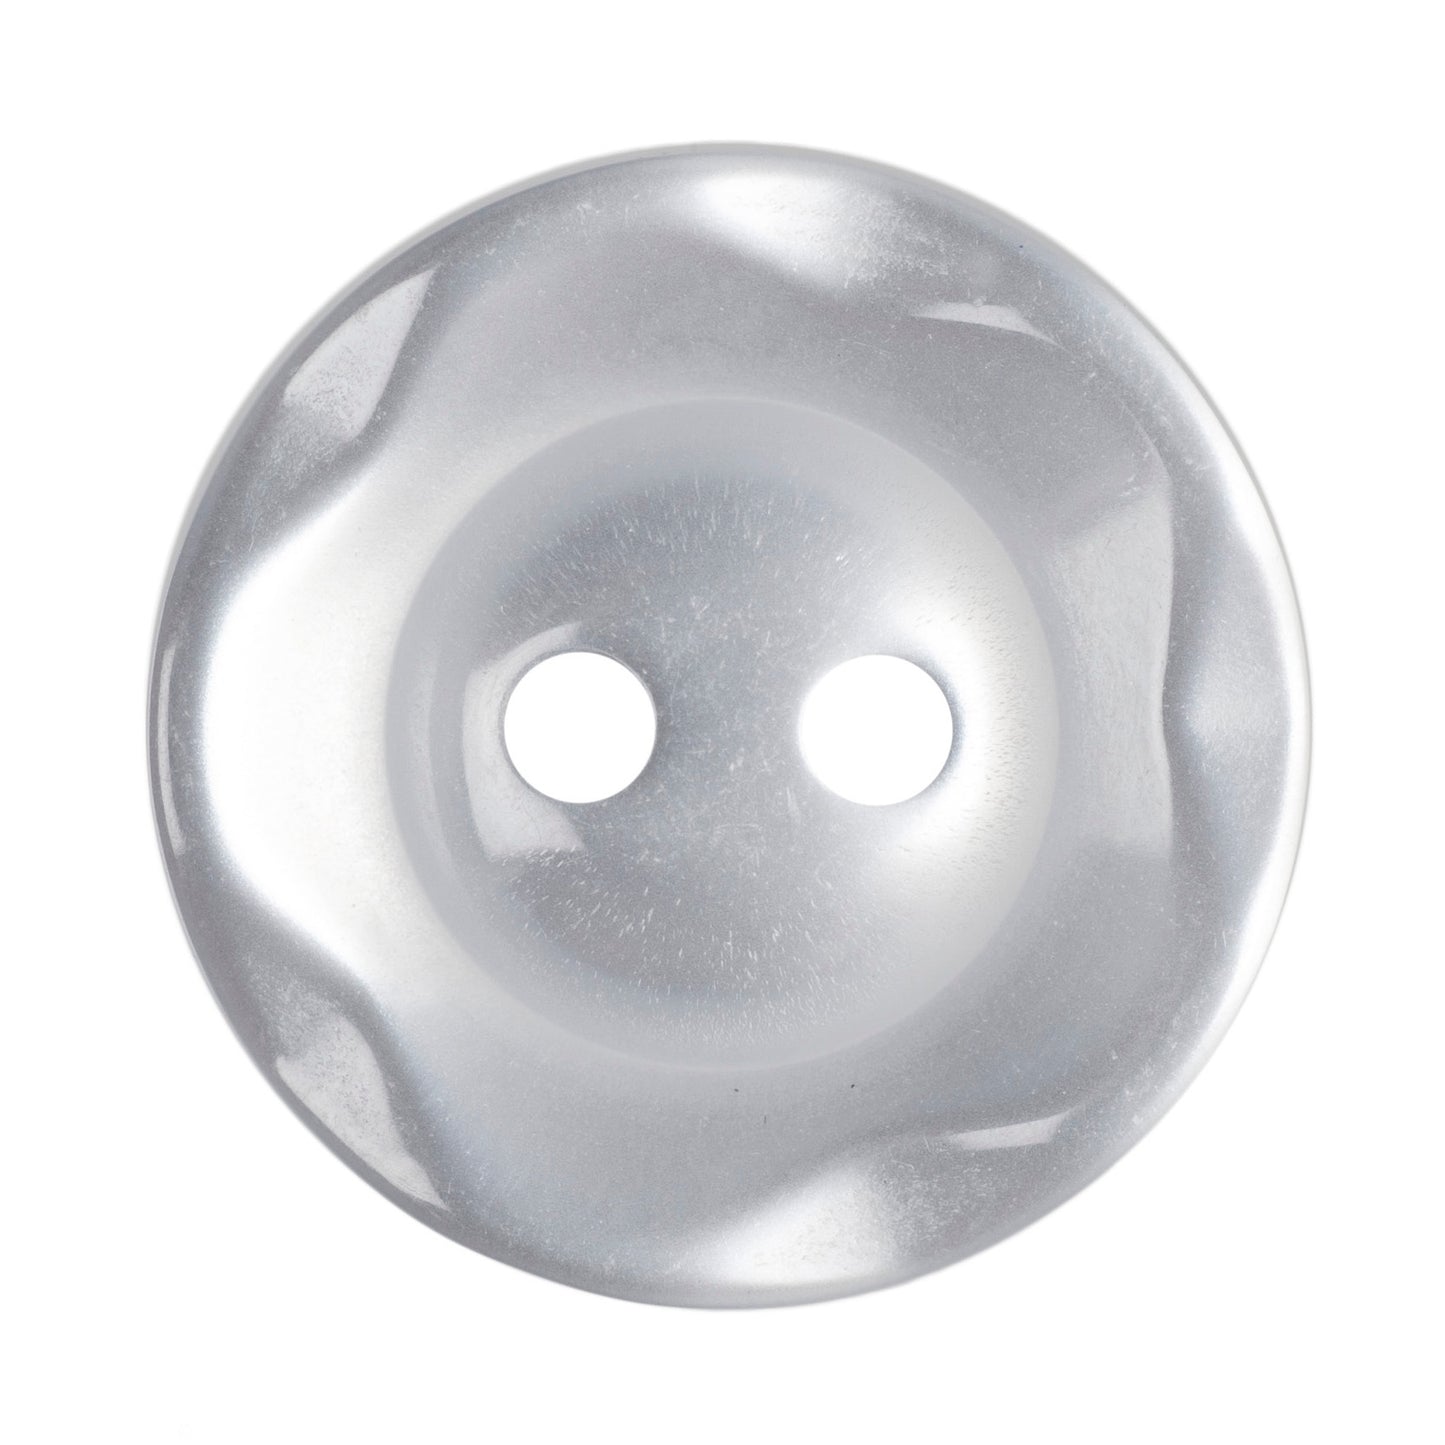 Polyester Scalloped Edge Button - 16mm - Pearl White [LB10.7]